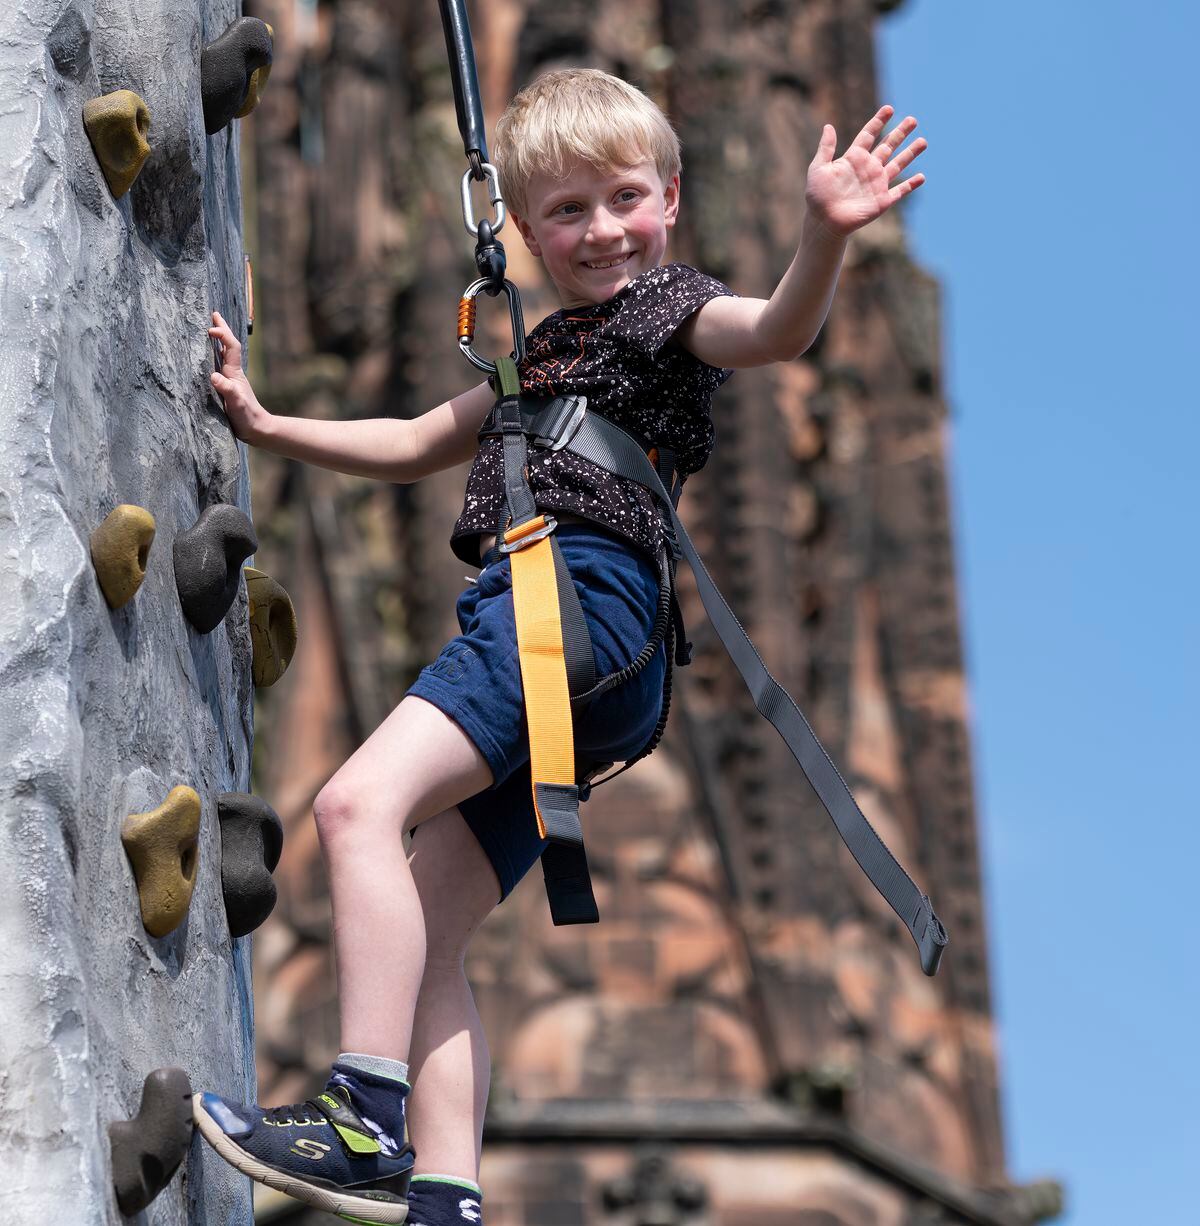 The 8m high climbing wall proved popular with children in the past and aims to do the same this time.